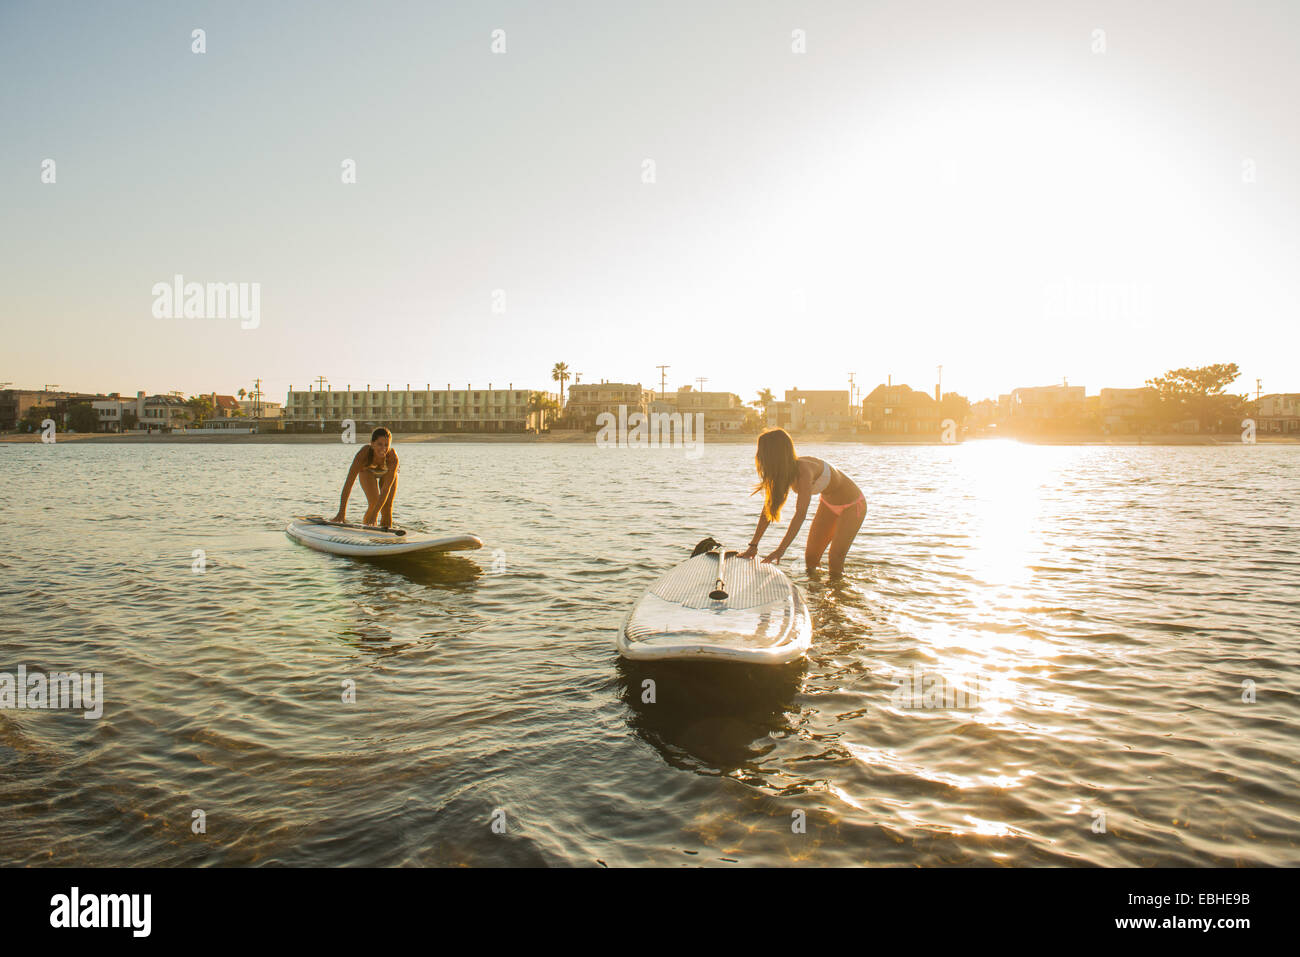 Two women pushing paddleboards at sunset, Mission Bay, San Diego, California, USA Stock Photo